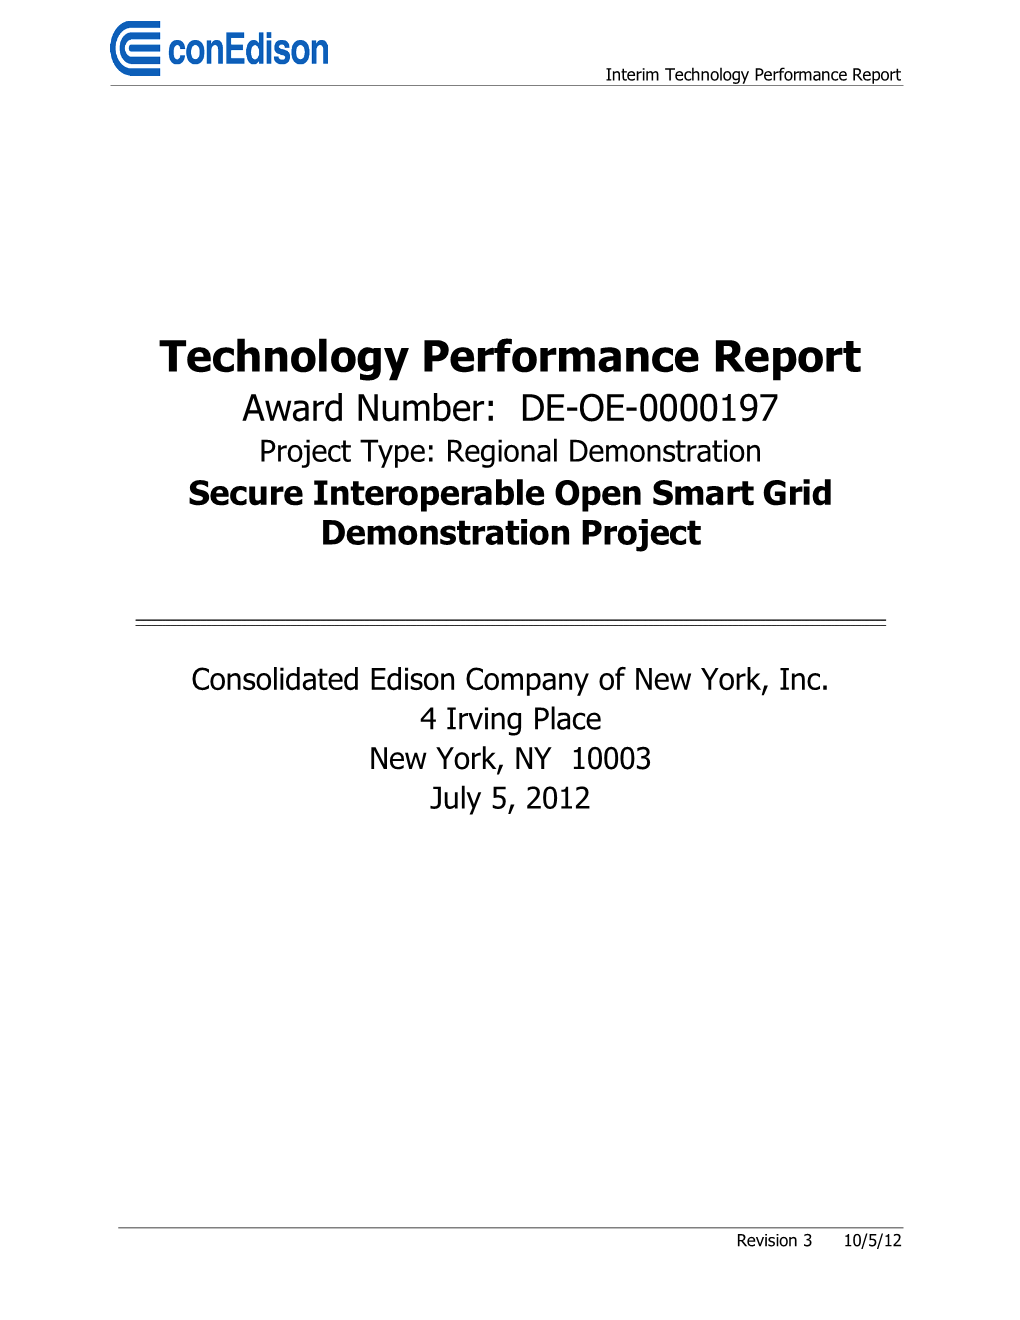 Consolidated Edison Company of NY, Secure Interoperable Open Smart Grid Demonstration Project, Interim Report